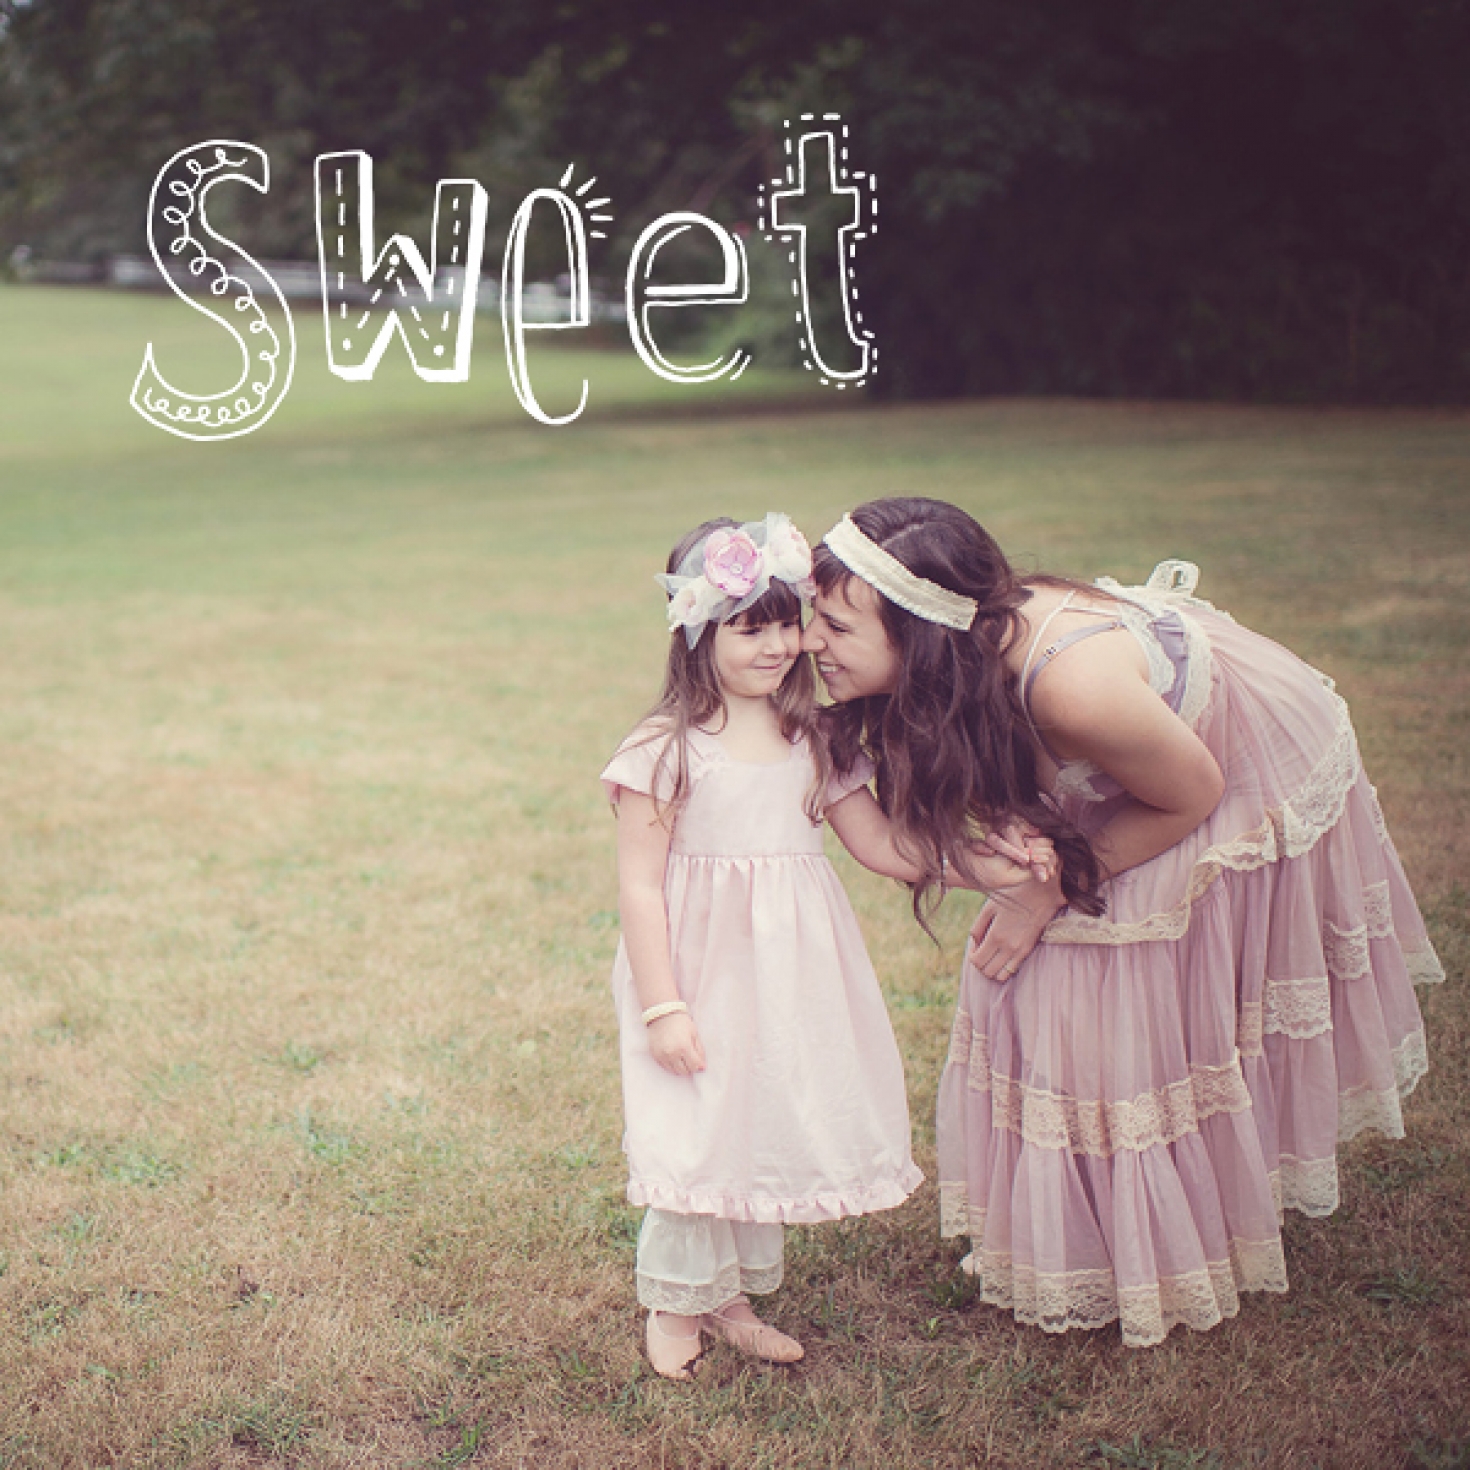 The Family Overlays | Shopgalleree.com - Photography Marketing, Design ...